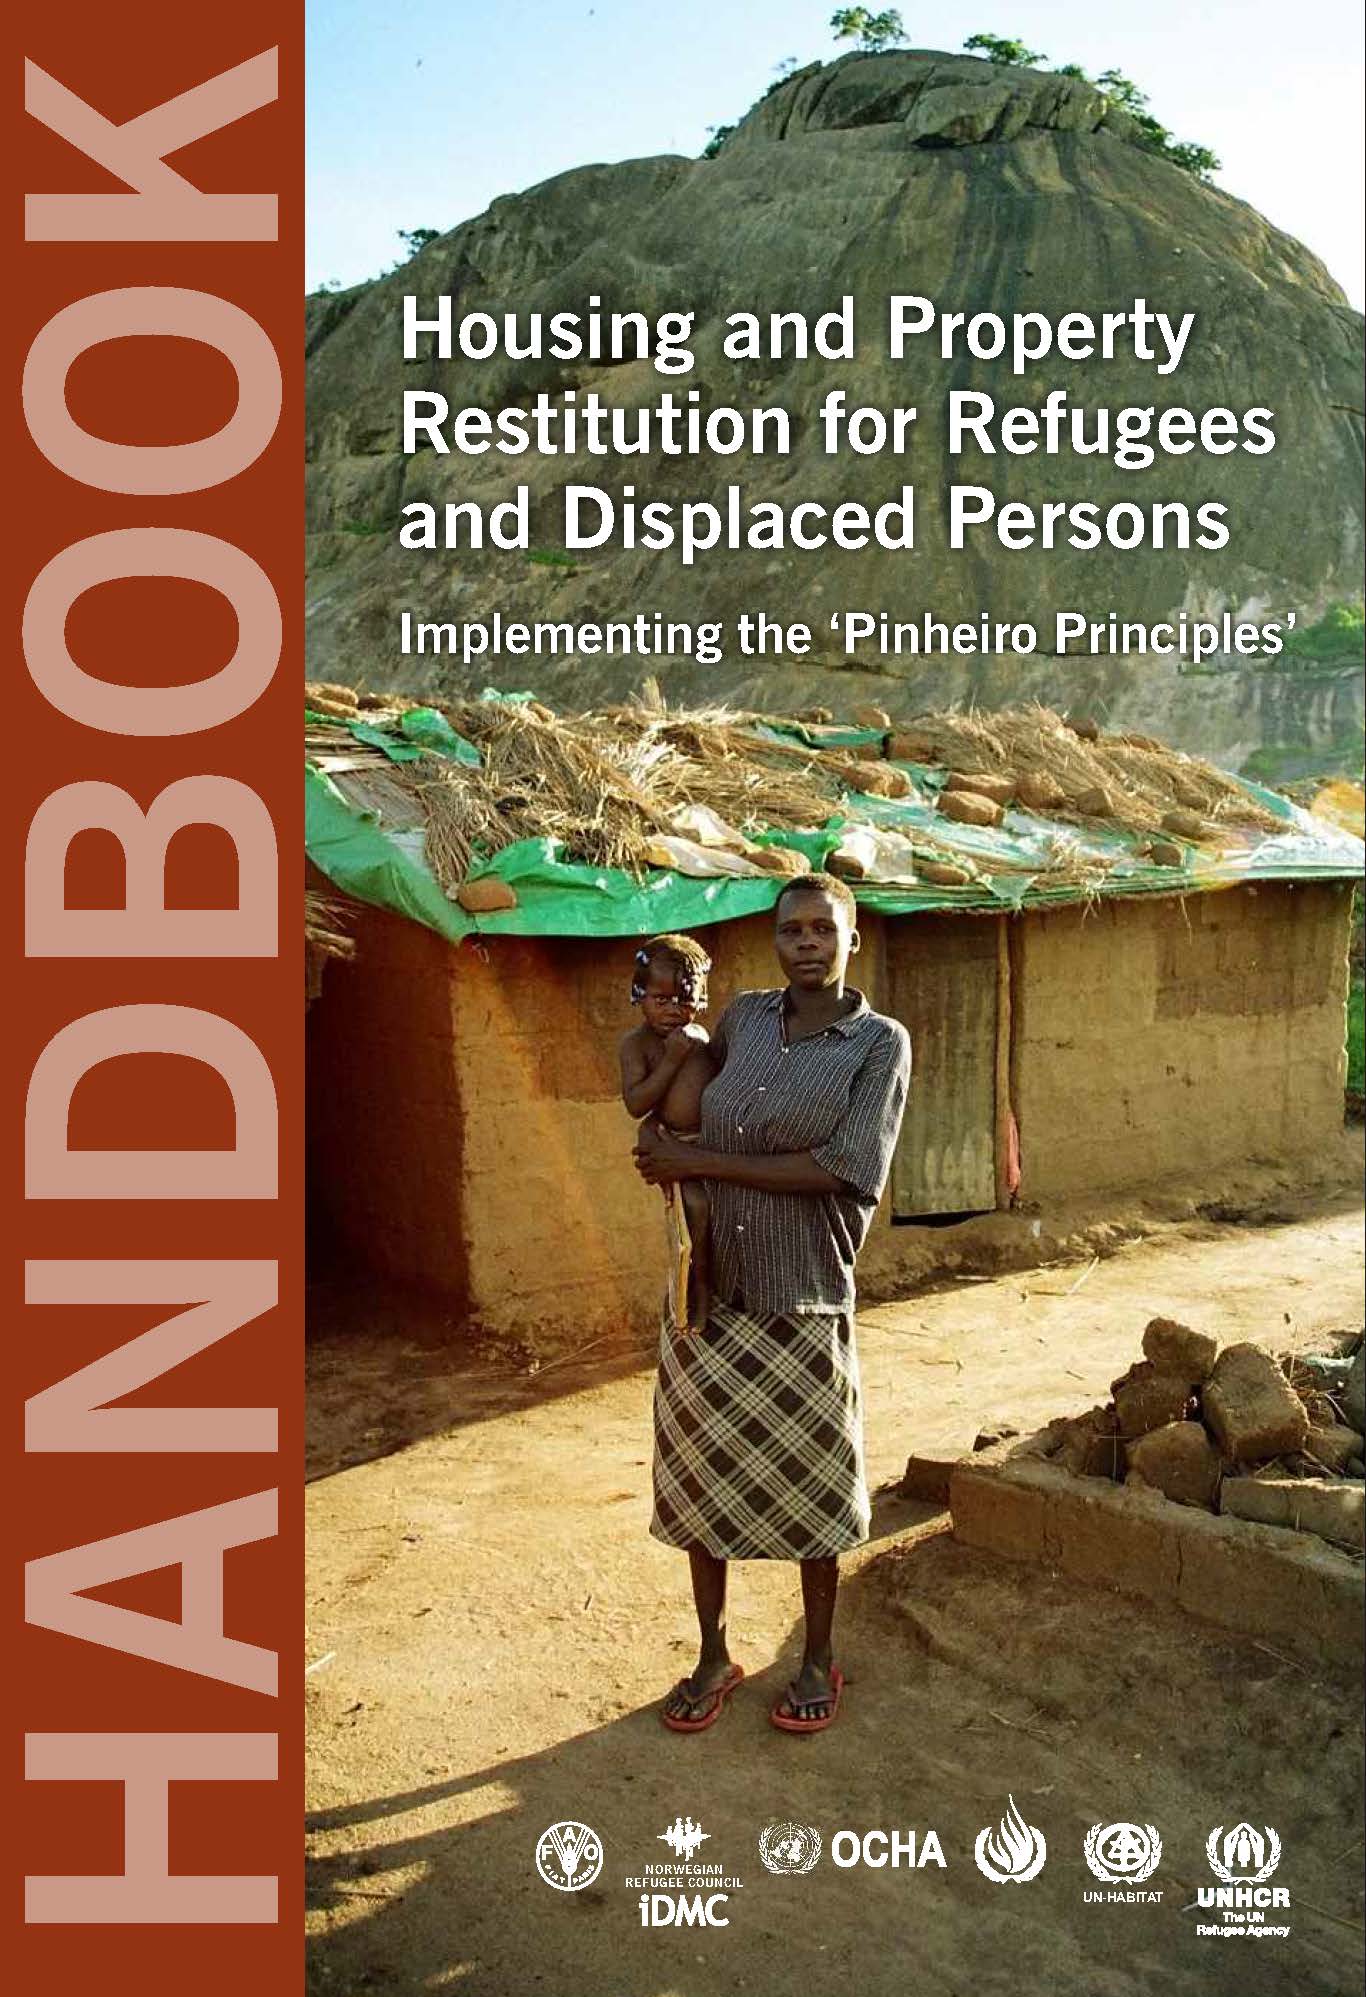 Housing and Property Restitution for Refugees and Displaced Persons: Implementing the ‘Pinheiro Principles’